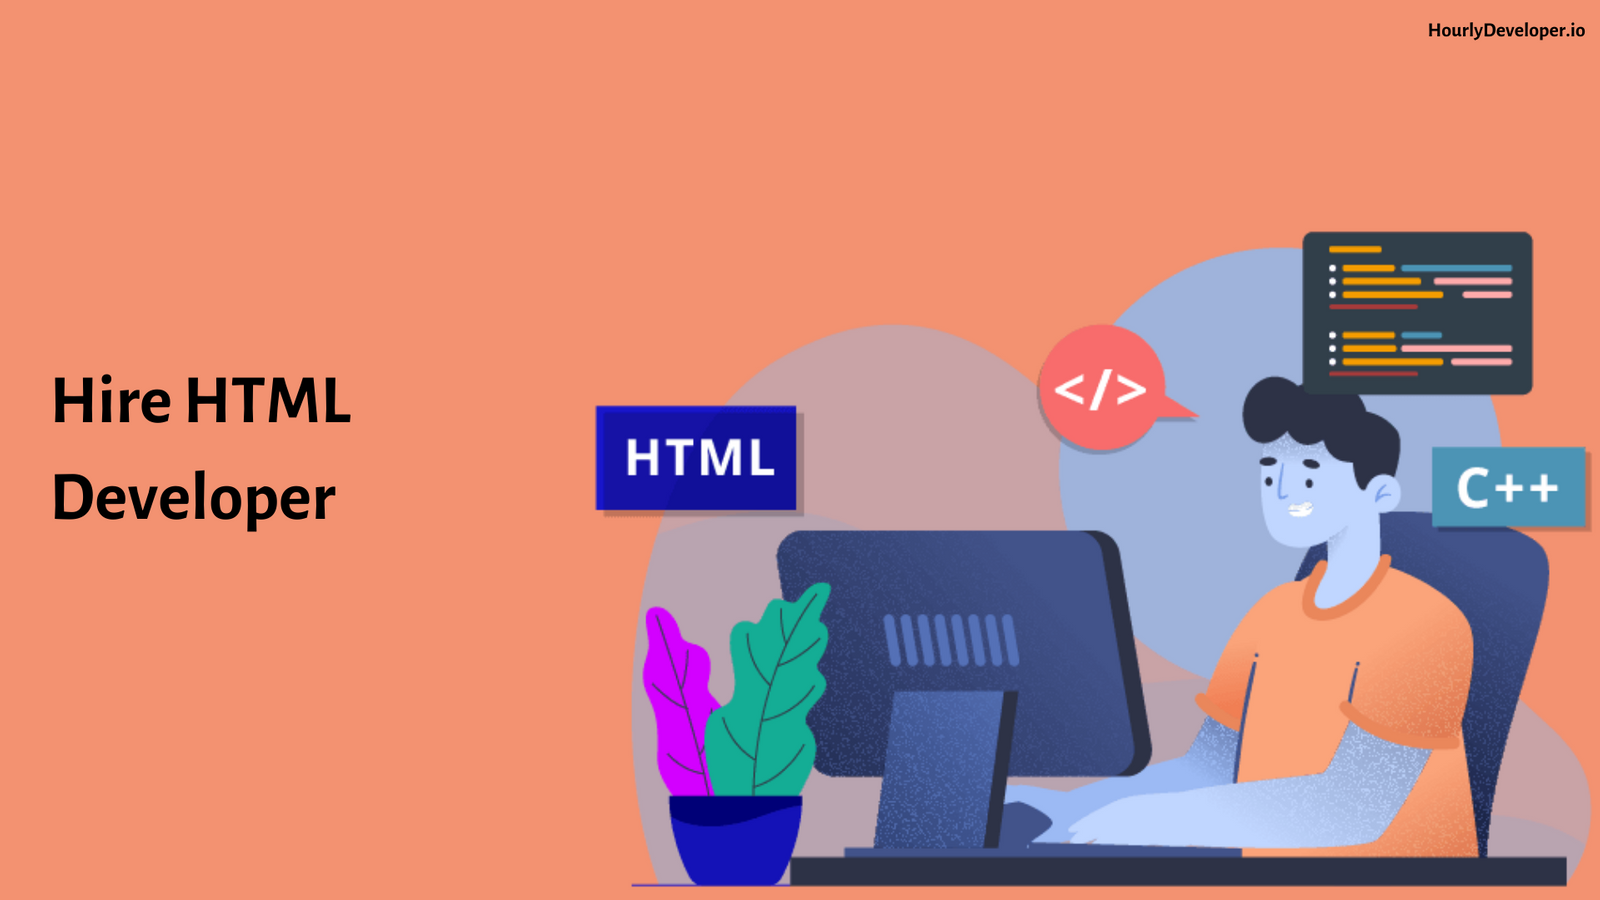 Hire HTML Developers